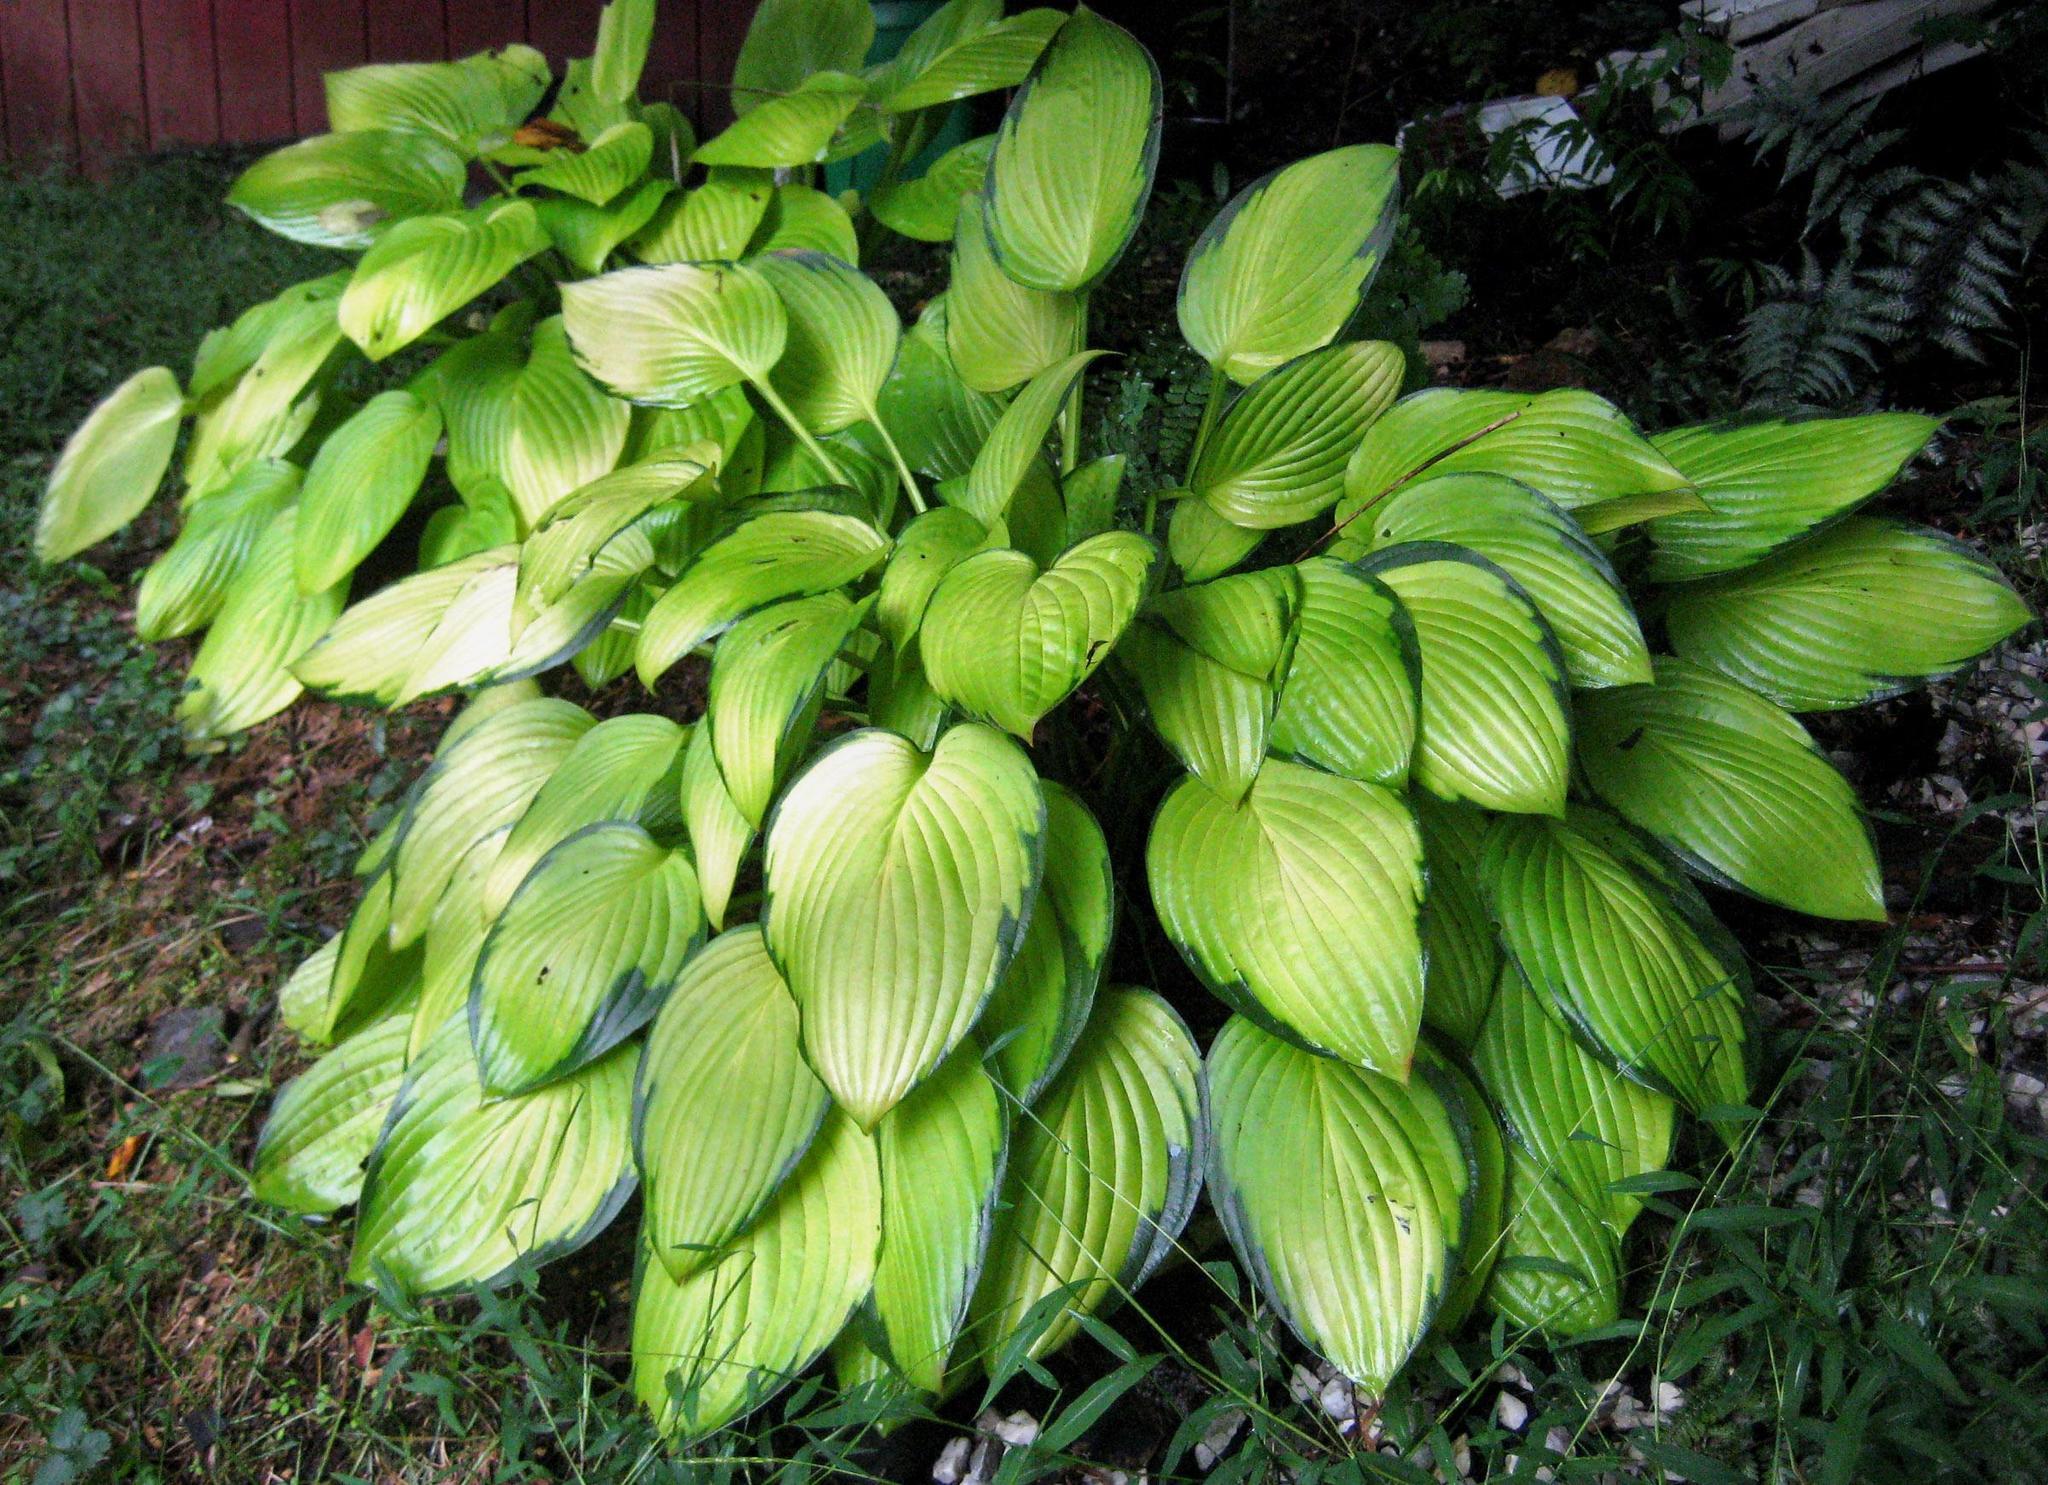 how to stop dogs from eating hostas